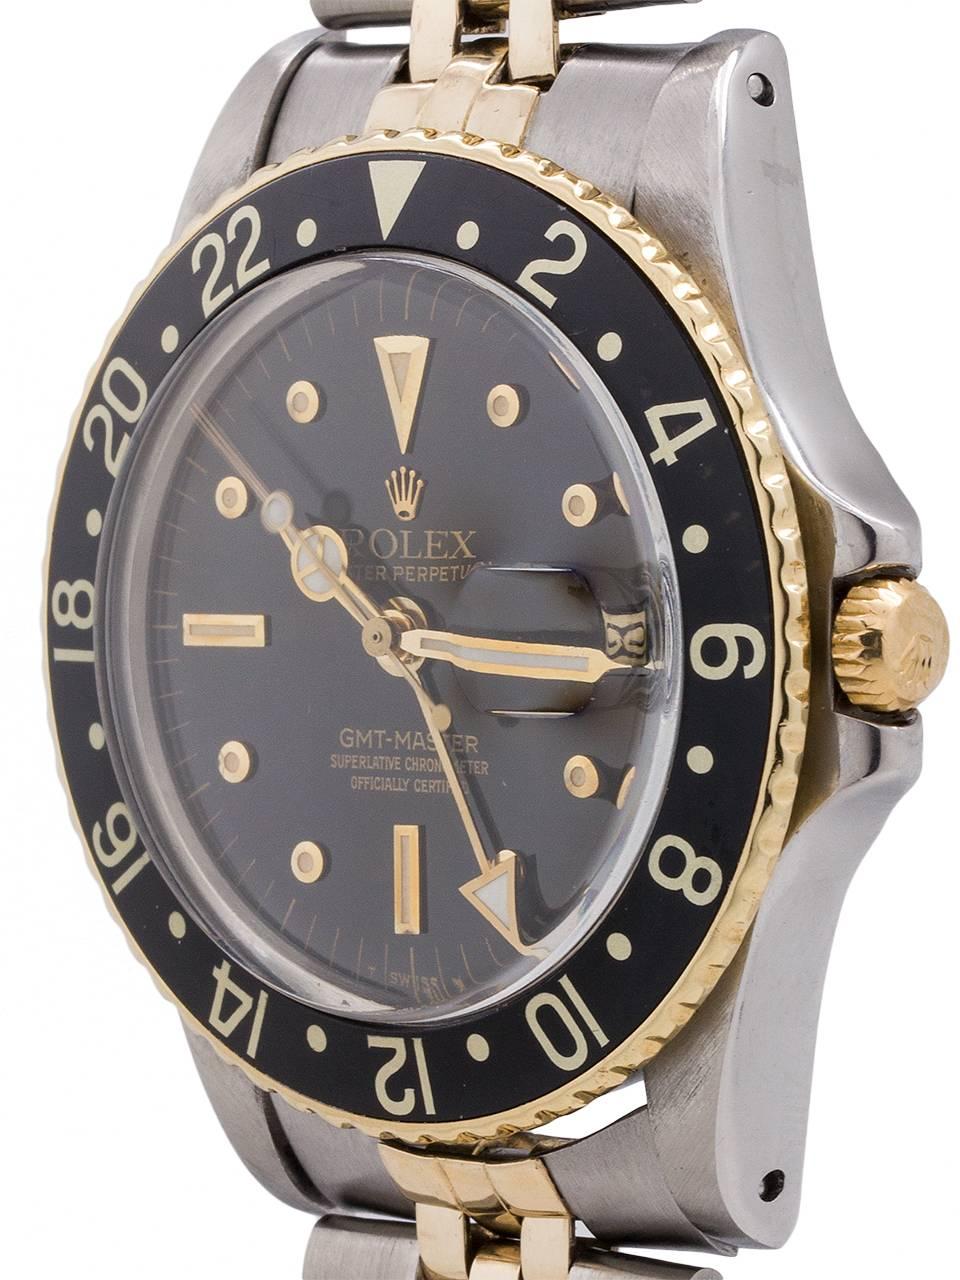 
Great looking and popular vintage Rolex ref# 1675 GMT stainless steel and 14K YG case serial # 5.8 million circa 1979. This is the steel and gold version of the famous 1675 GMT. Featuring a 40mm diameter case with bi-directional 24 hour black bezel